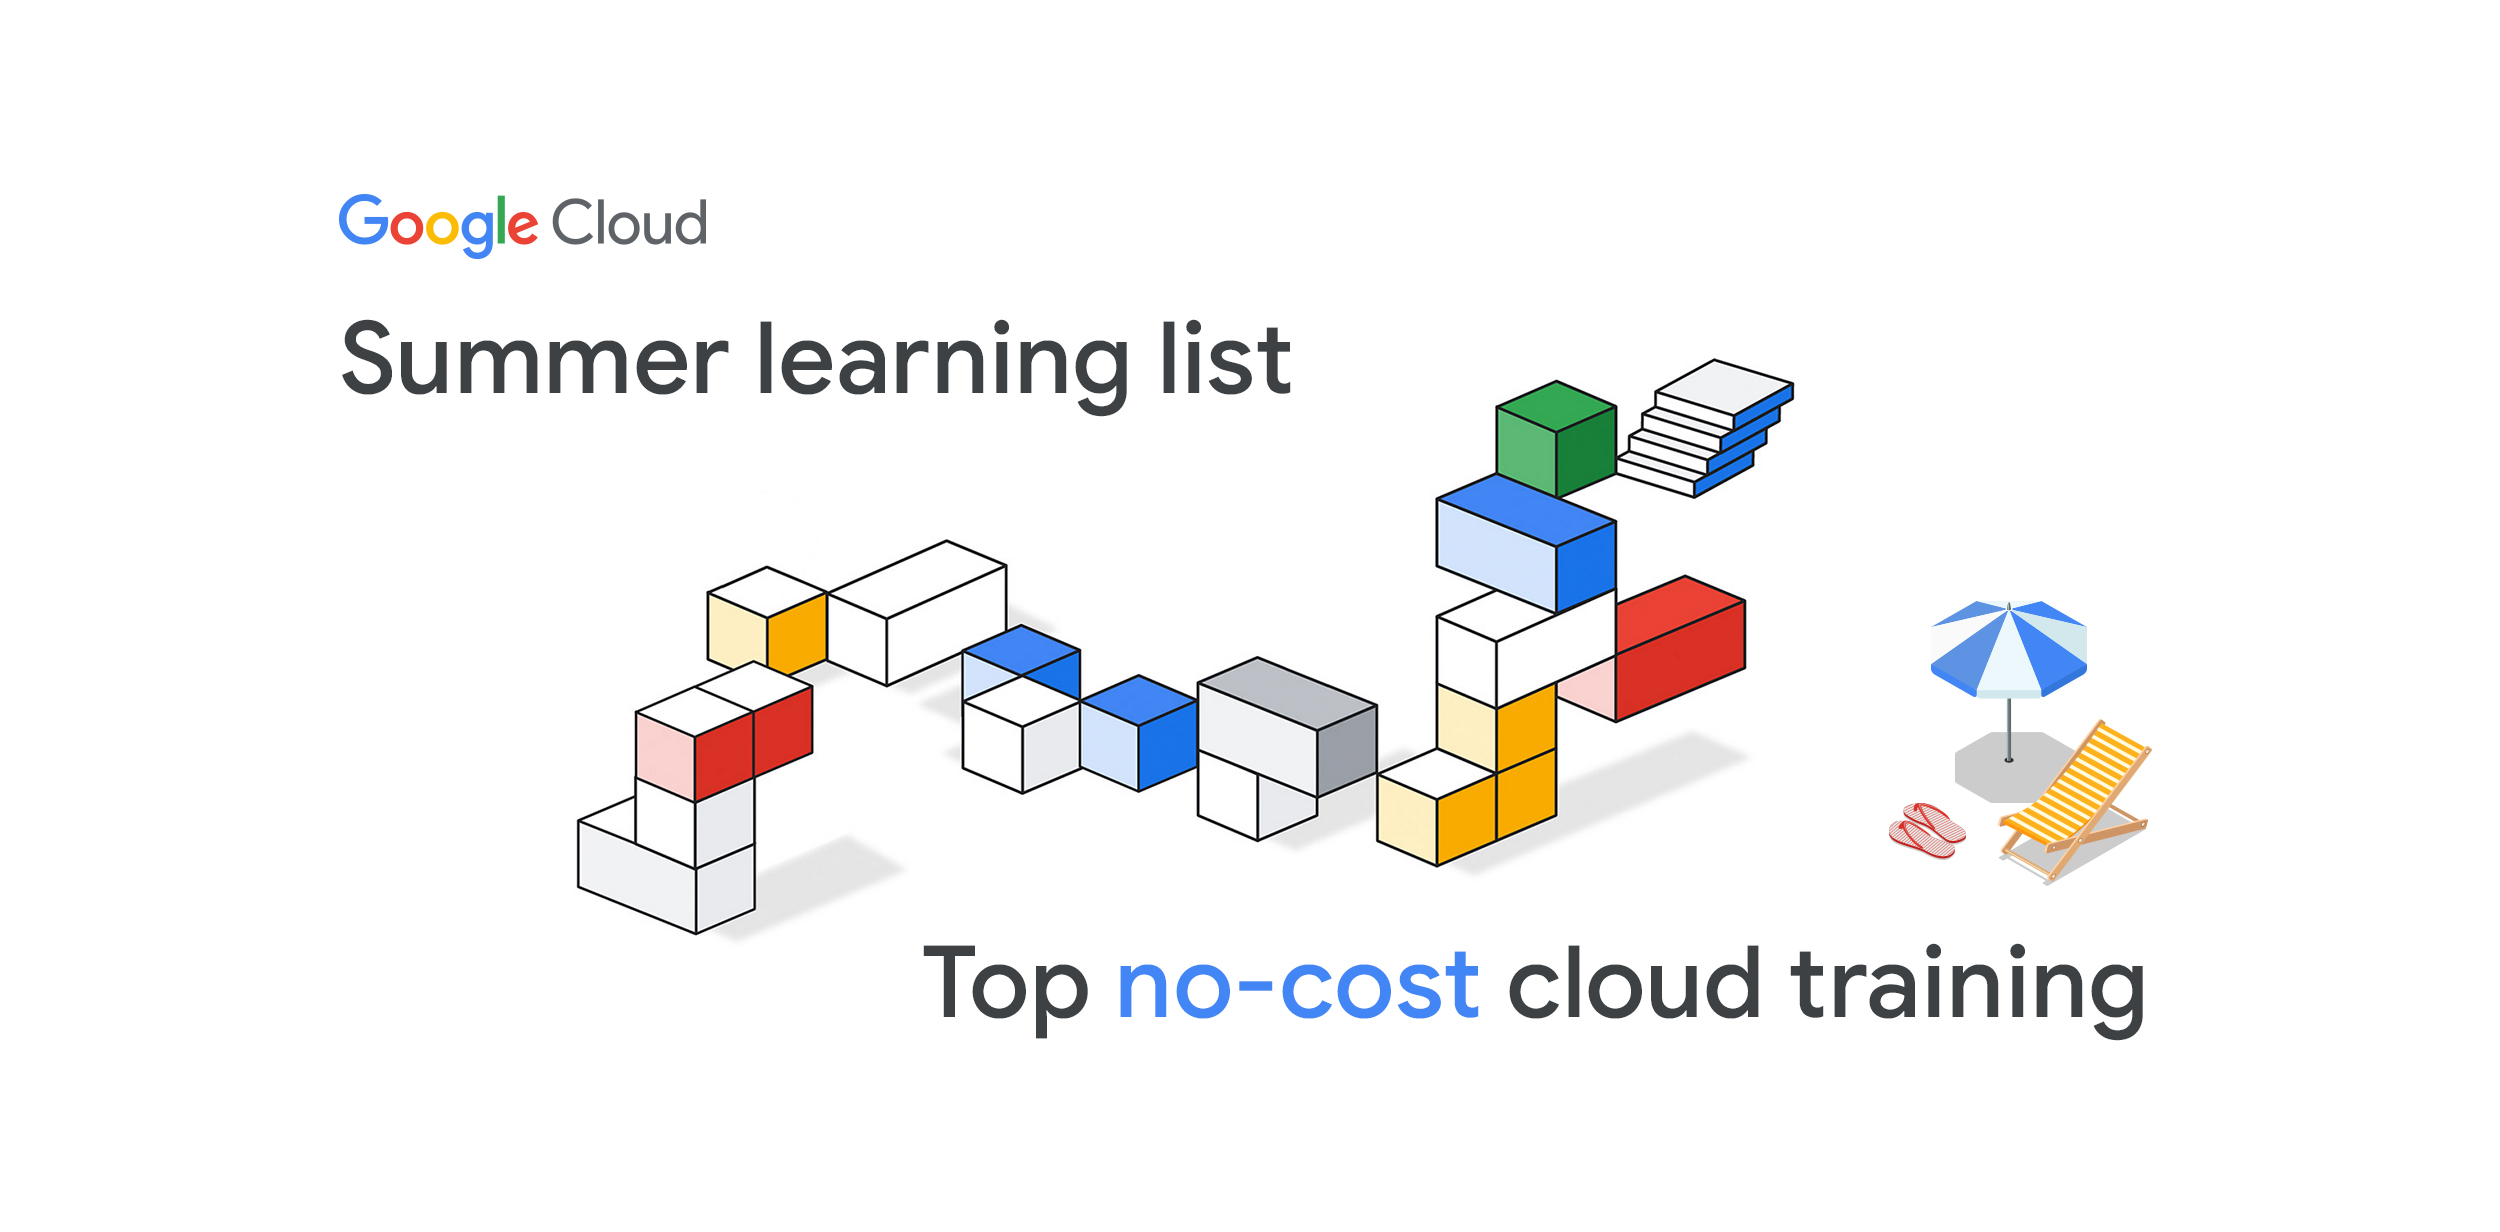 A banner with the text 'Google Cloud Summer Learning List' is displayed on top right corner of the image. In the middle, there is an illustration of colorful building blocks. Next to the blocks are beach items, such as an umbrella, a chair, and a towel. At the bottom of the figure, the text 'Top no-cost cloud training' is displayed.